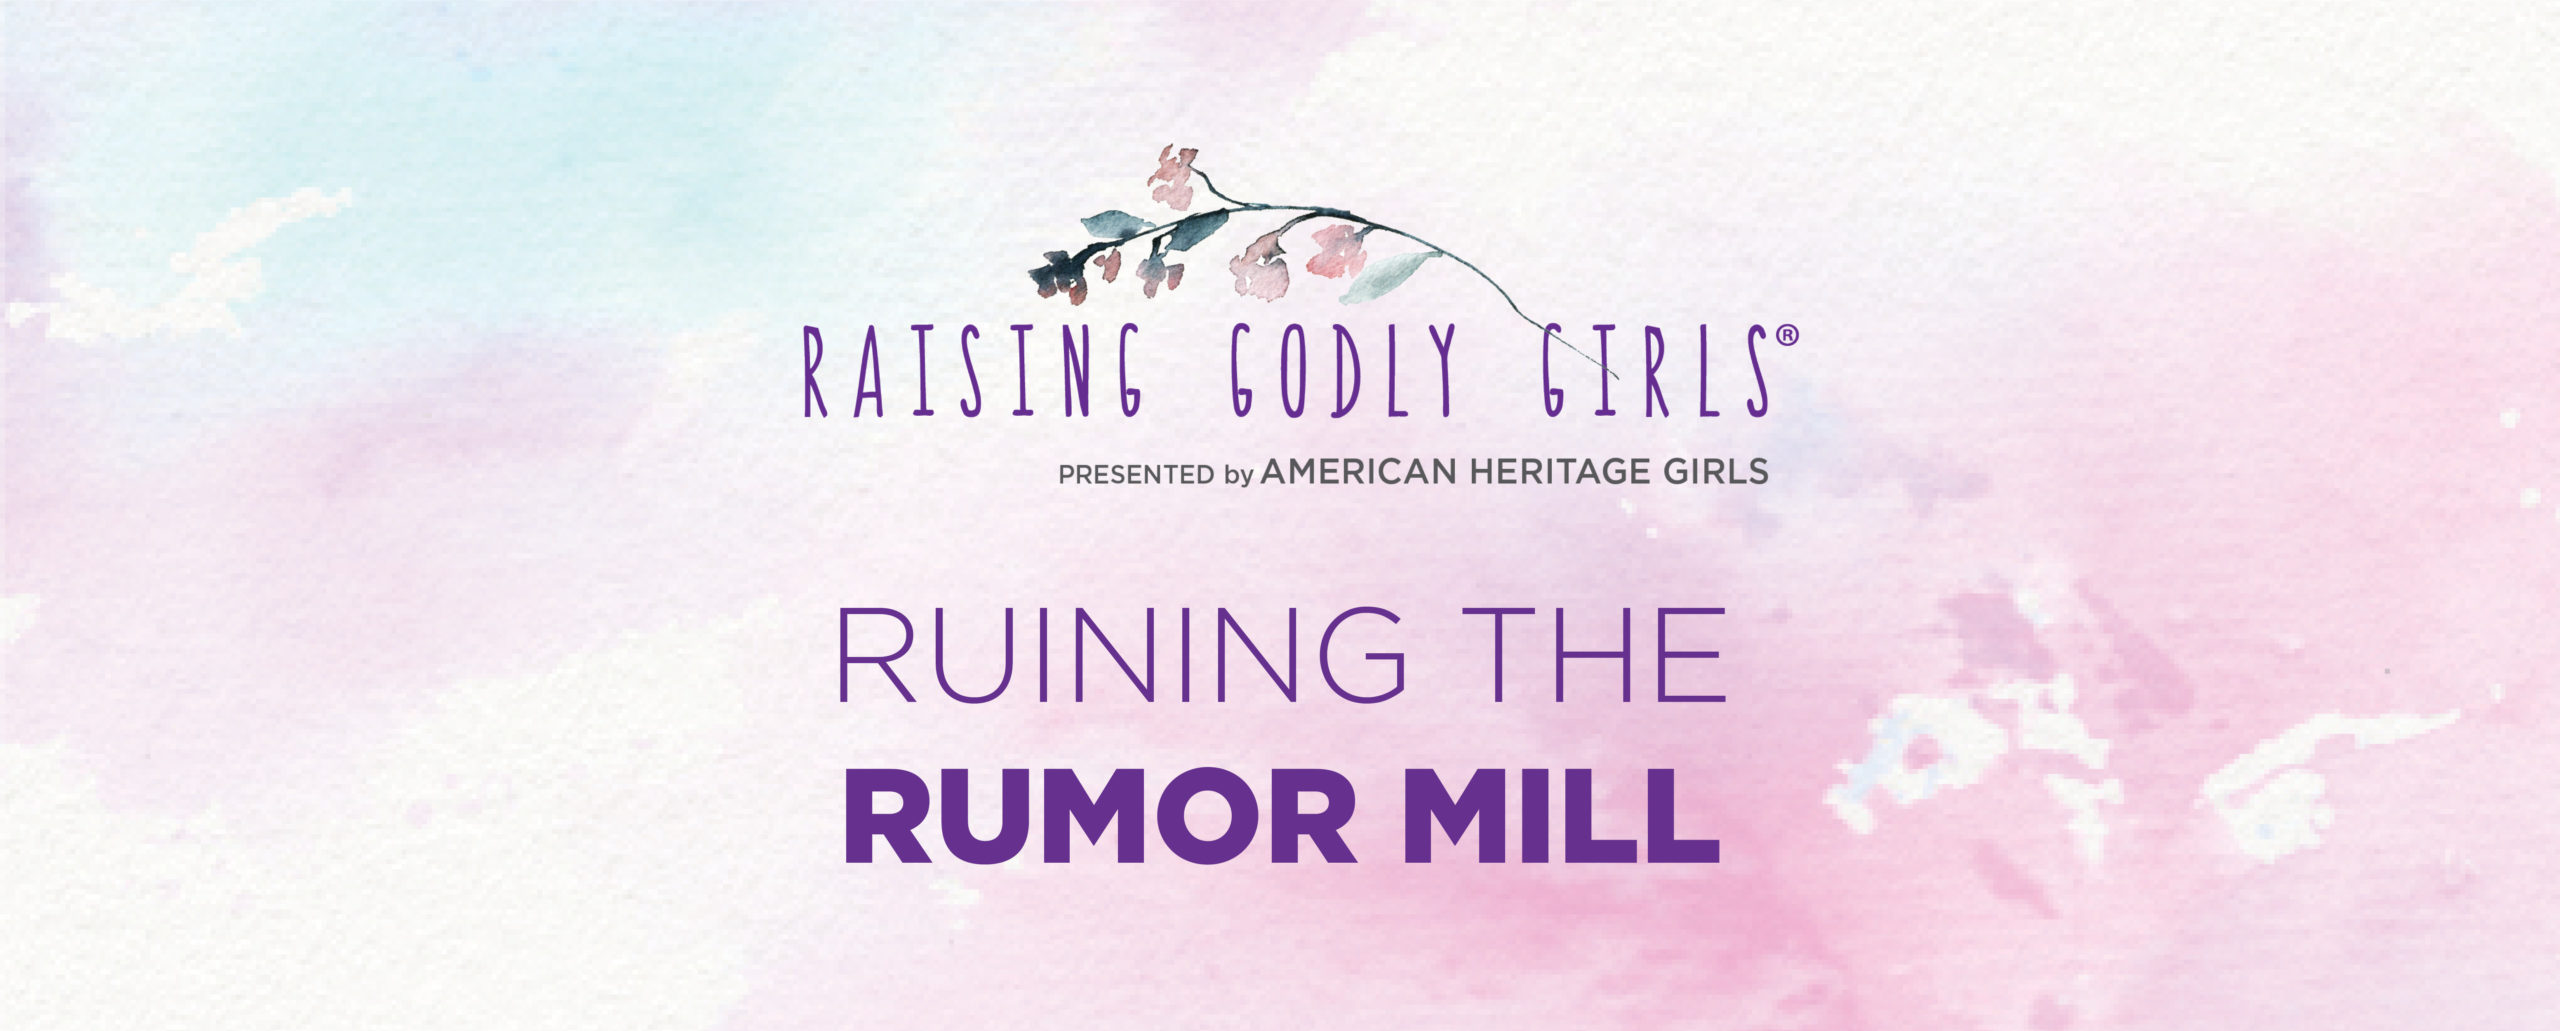 Christian Parenting advice on gossip and runing the rumor mill